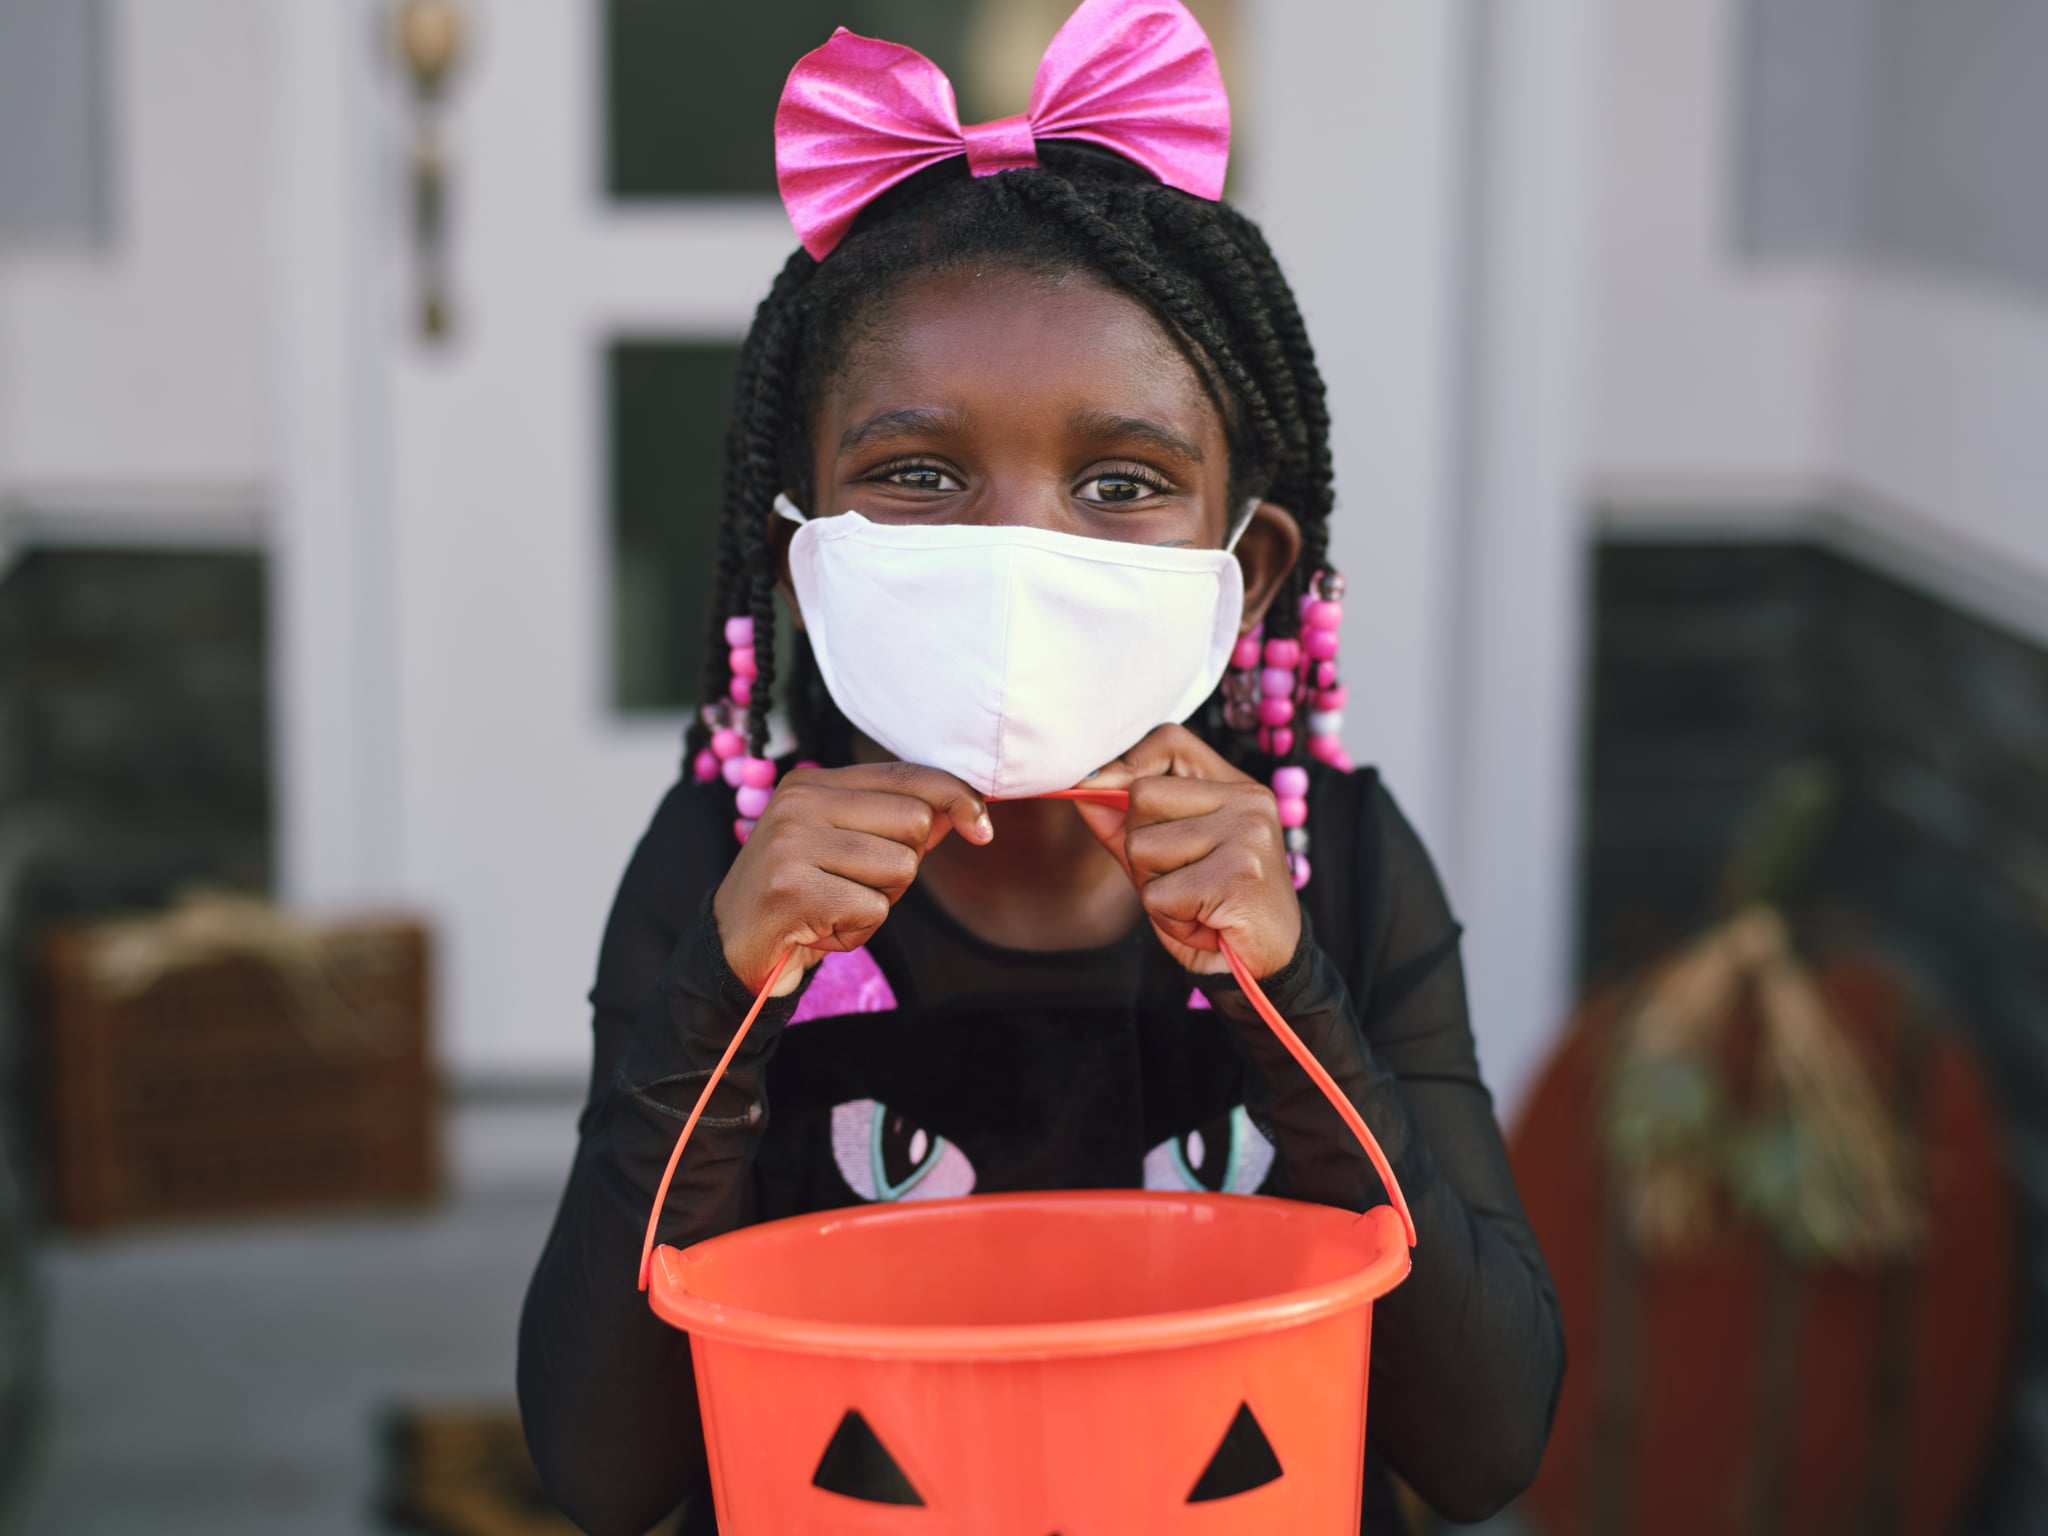 Children trick or treating on Halloween wearing facemarks for protection.